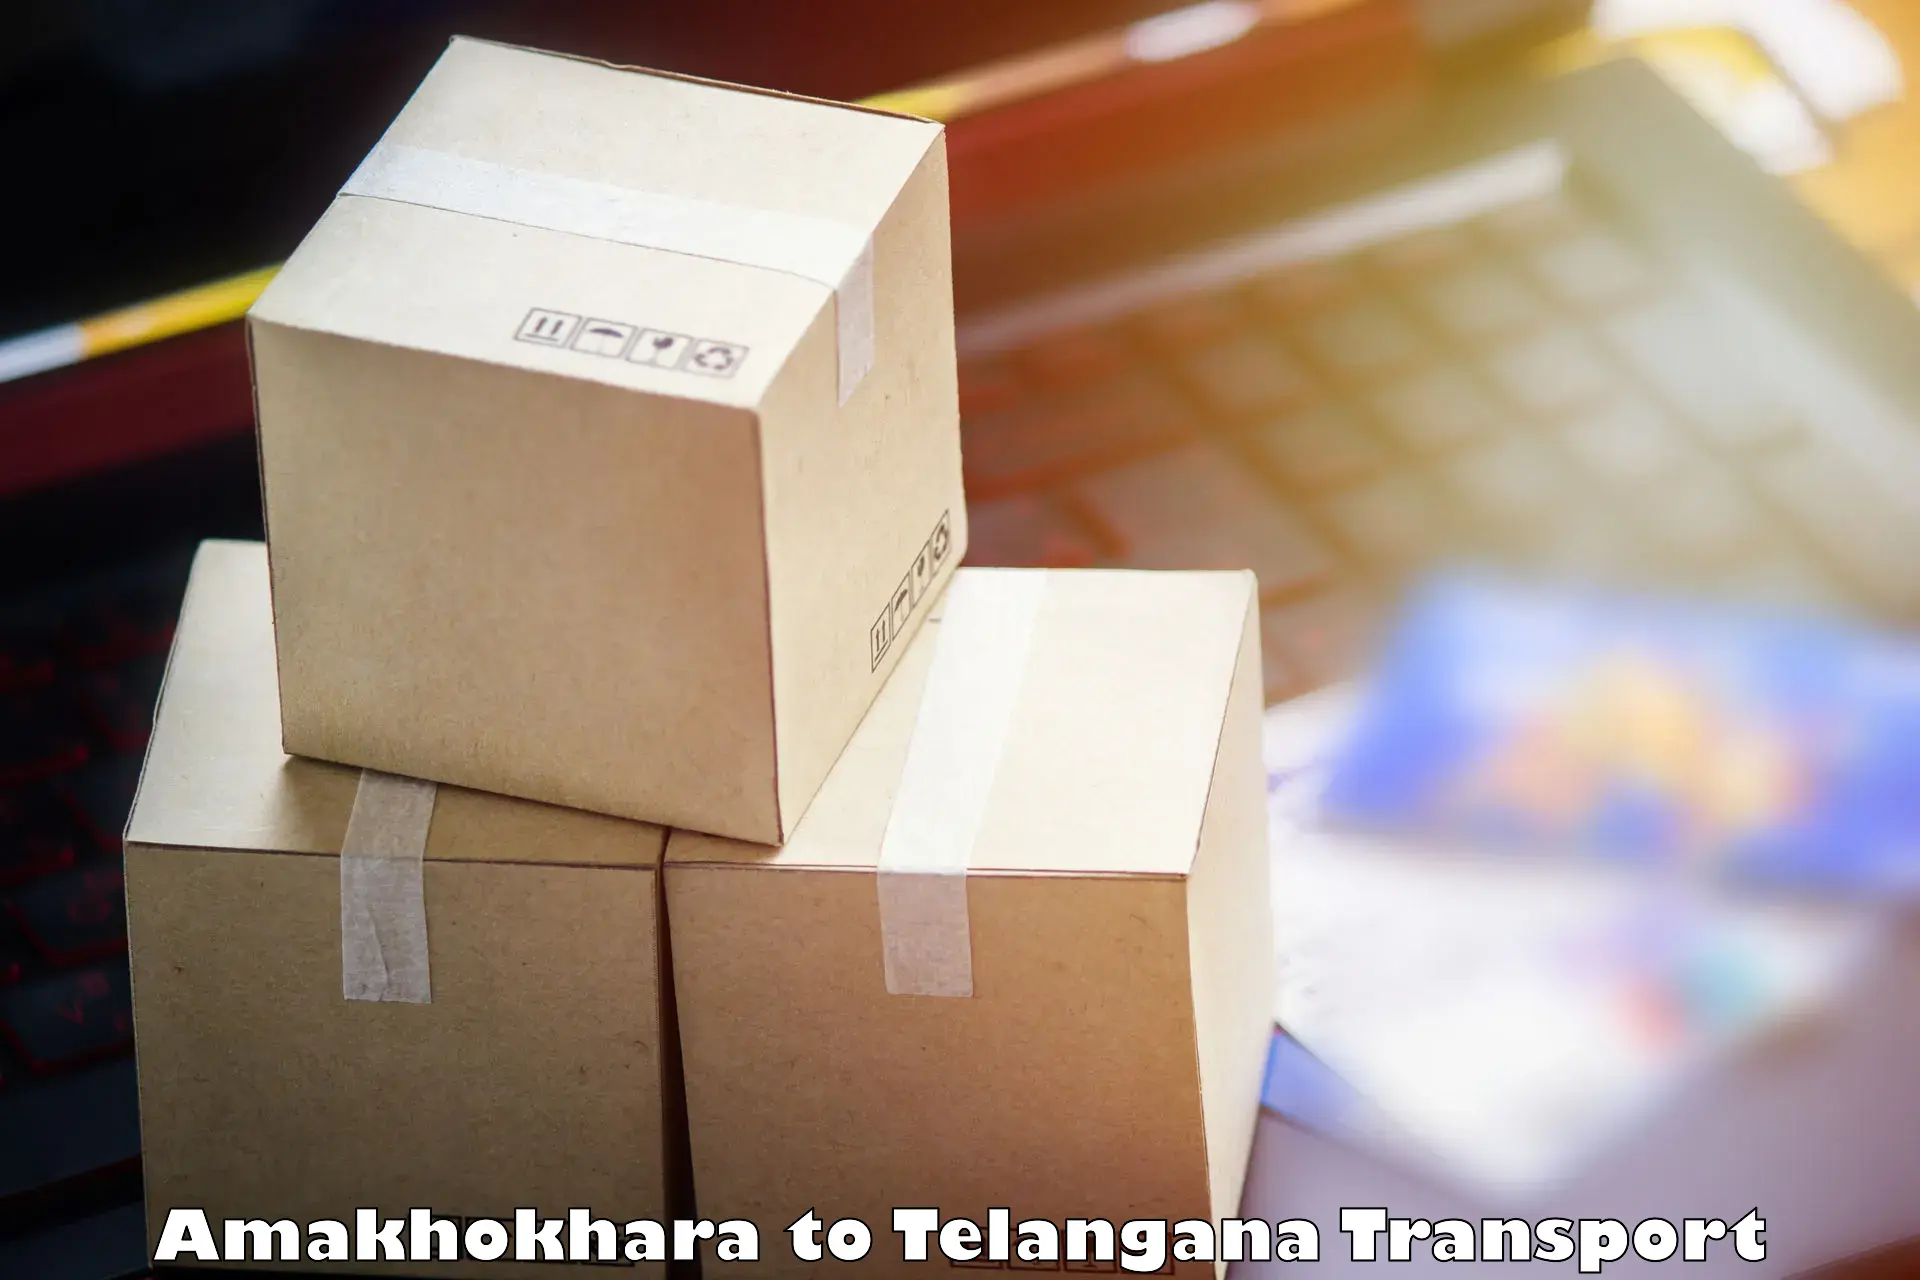 Transport shared services in Amakhokhara to Odela